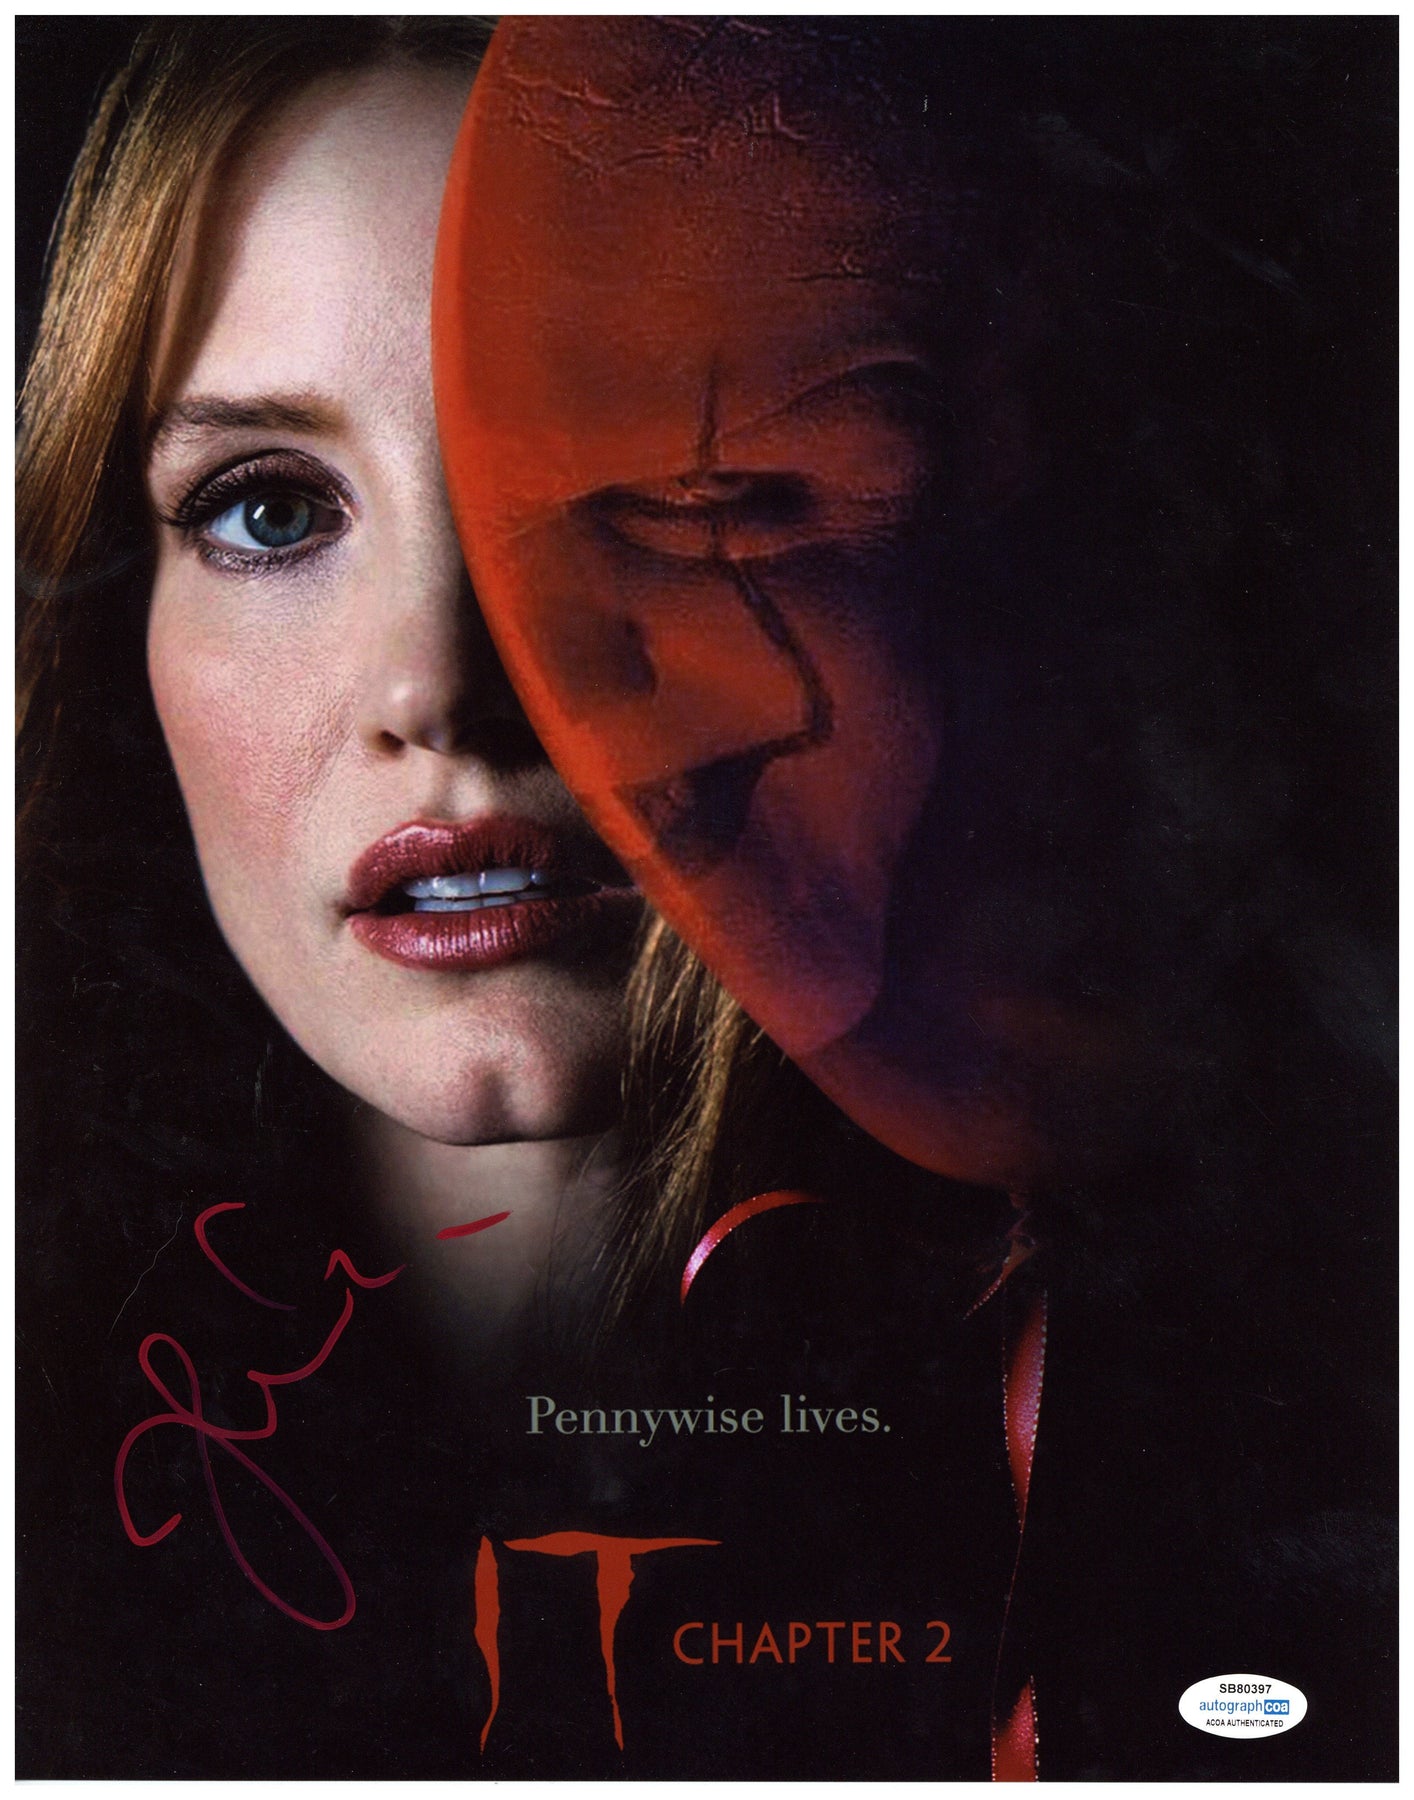 Jessica Chastain Signed 11x14 Photo It Chapter 2 Autographed Acoa Zobie Productions 